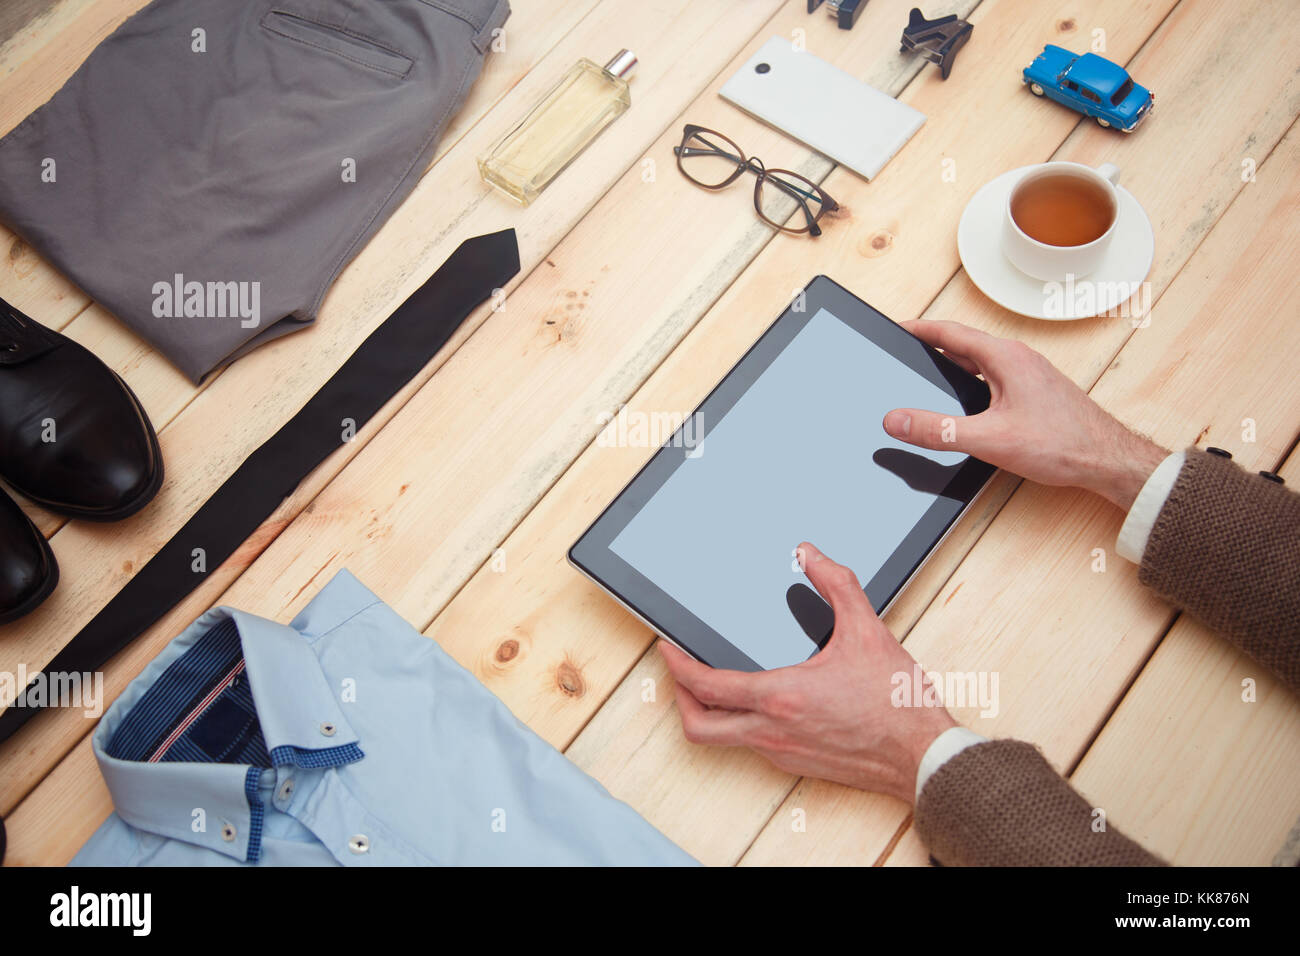 A businessman uses a tablet. The concept of men's online shopping. Fashionable clothes and accessories are on the table. Stock Photo